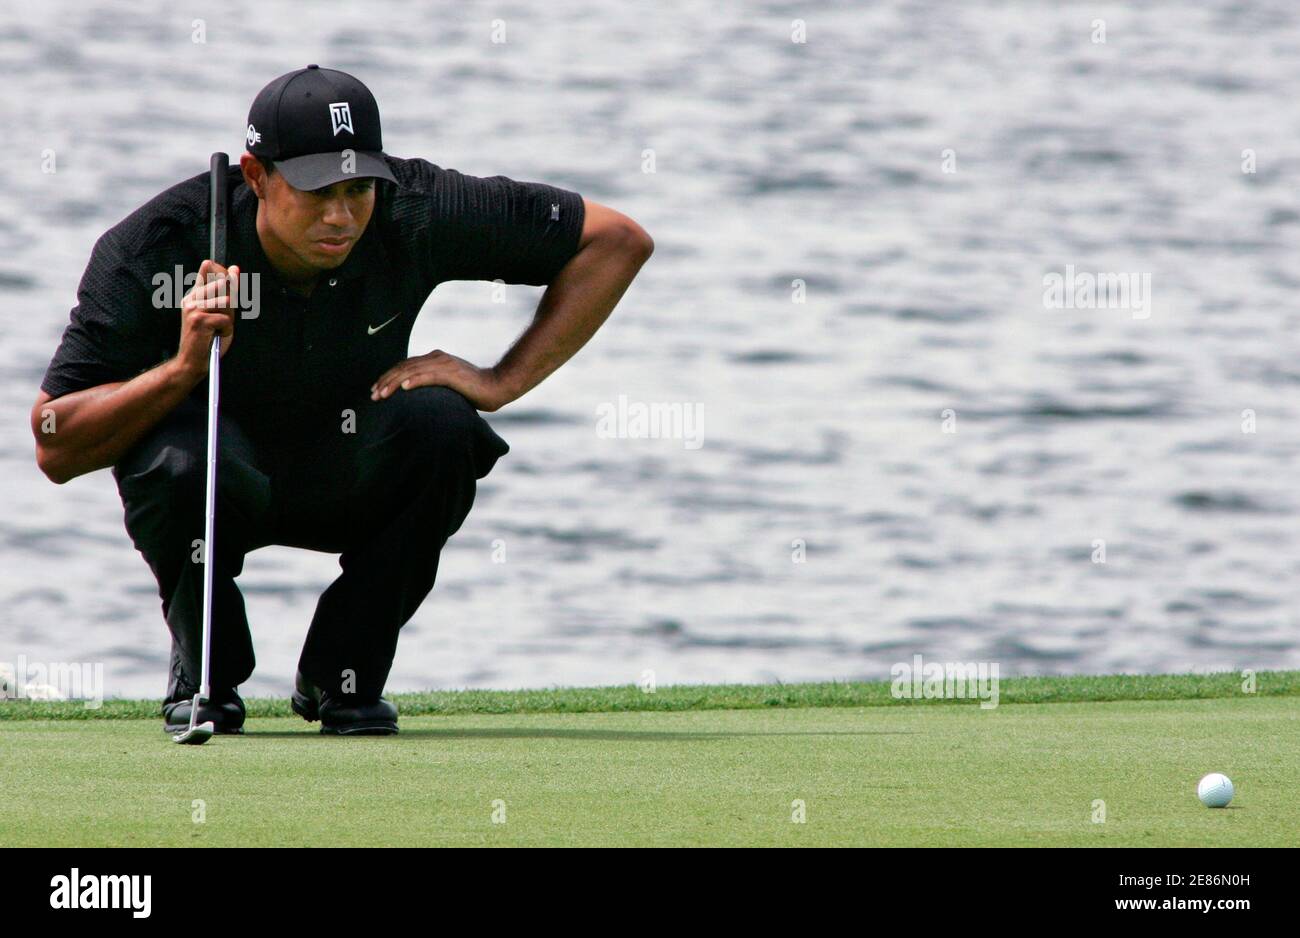 Tiger Woods lines up his putt on the third hole during the second round of play at the Arnold Palmer Invitational golf tournament held at the Bay Hill Club in Orlando, Florida, March 16, 2007. REUTERS/Rick Fowler (UNITED STATES) Stock Photo